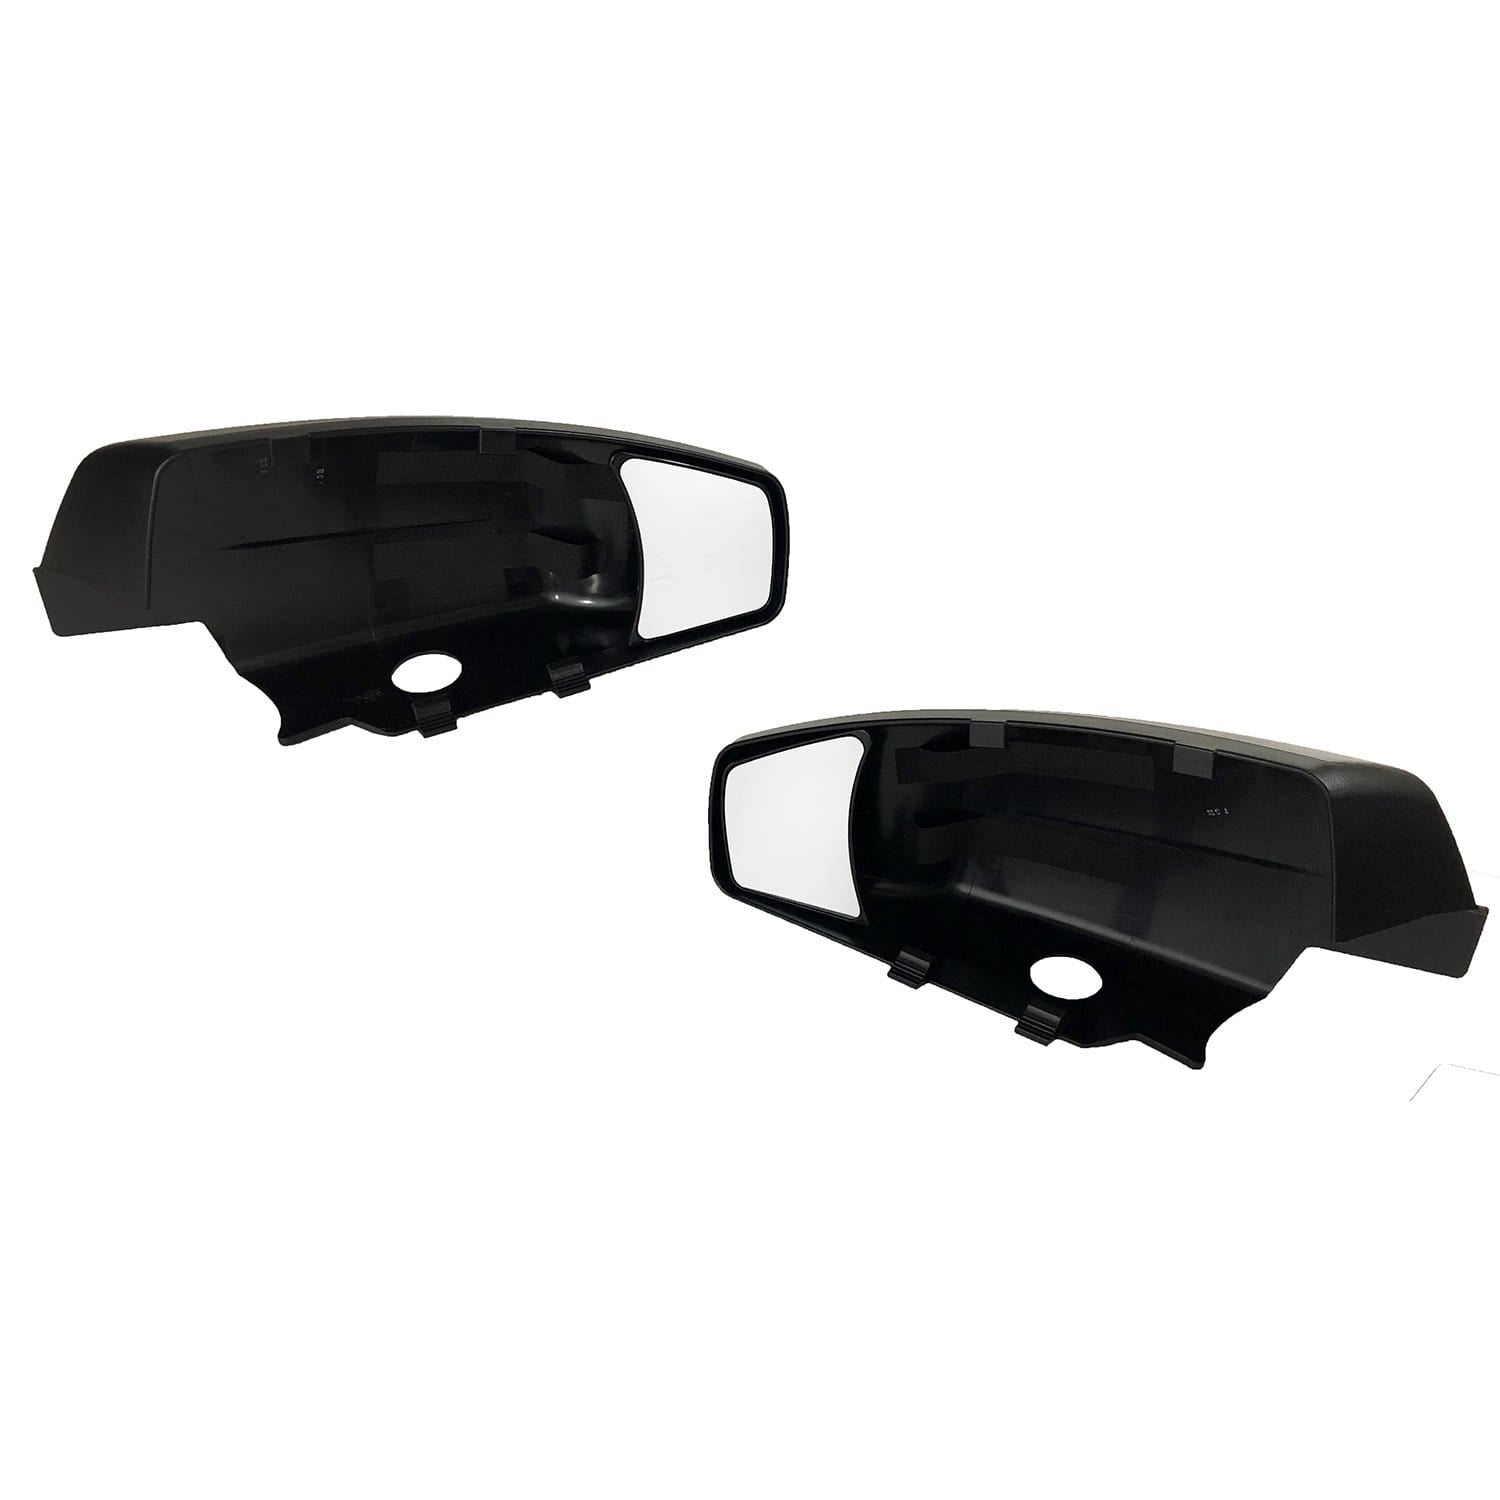 K Source KSO-80910 Snap & Zap Snap-On Exterior Towing Mirror Pair